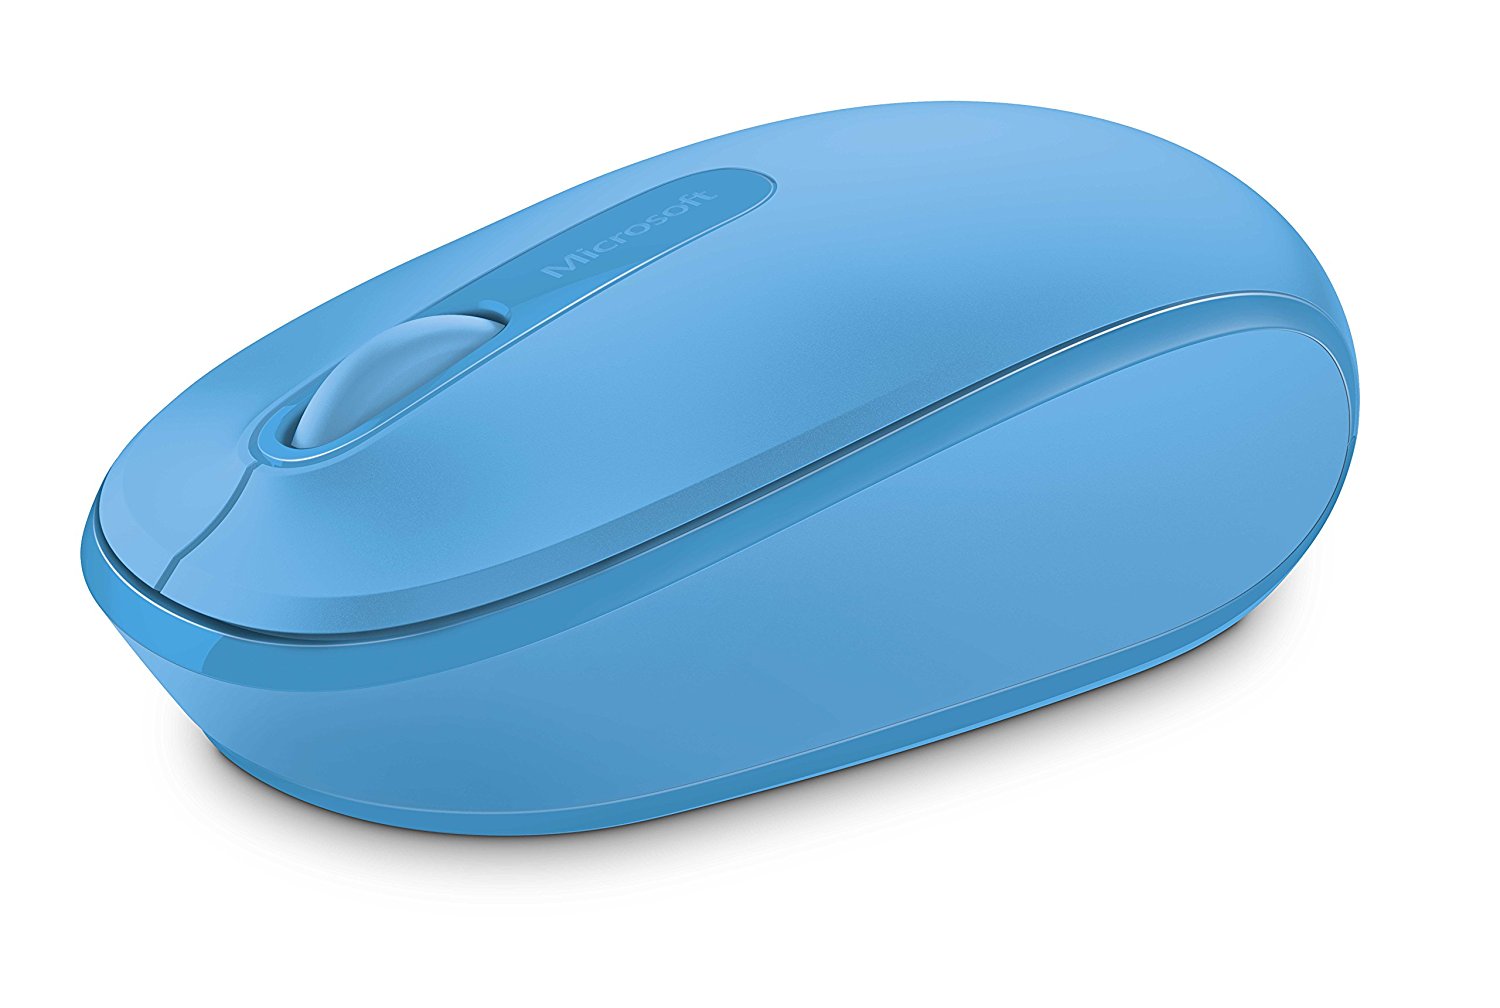 Microsoft Wireless Mobile Mouse 1850 - mouse - 2.4 GHz - cyan blue - image 1 of 4